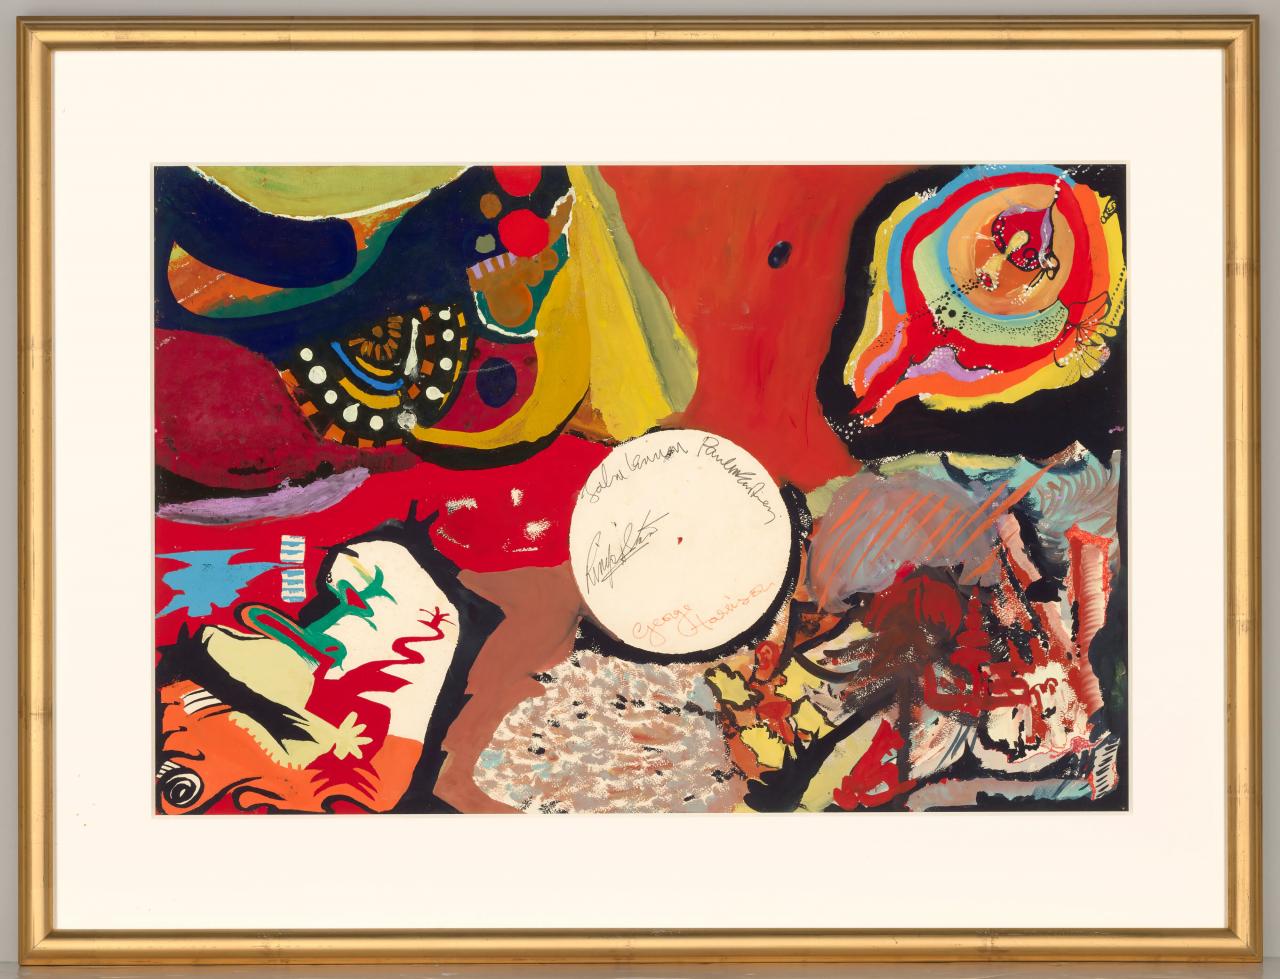 Beatles Painting Made Between Tokyo Performances Sells for $1.7 M. at Christie’s